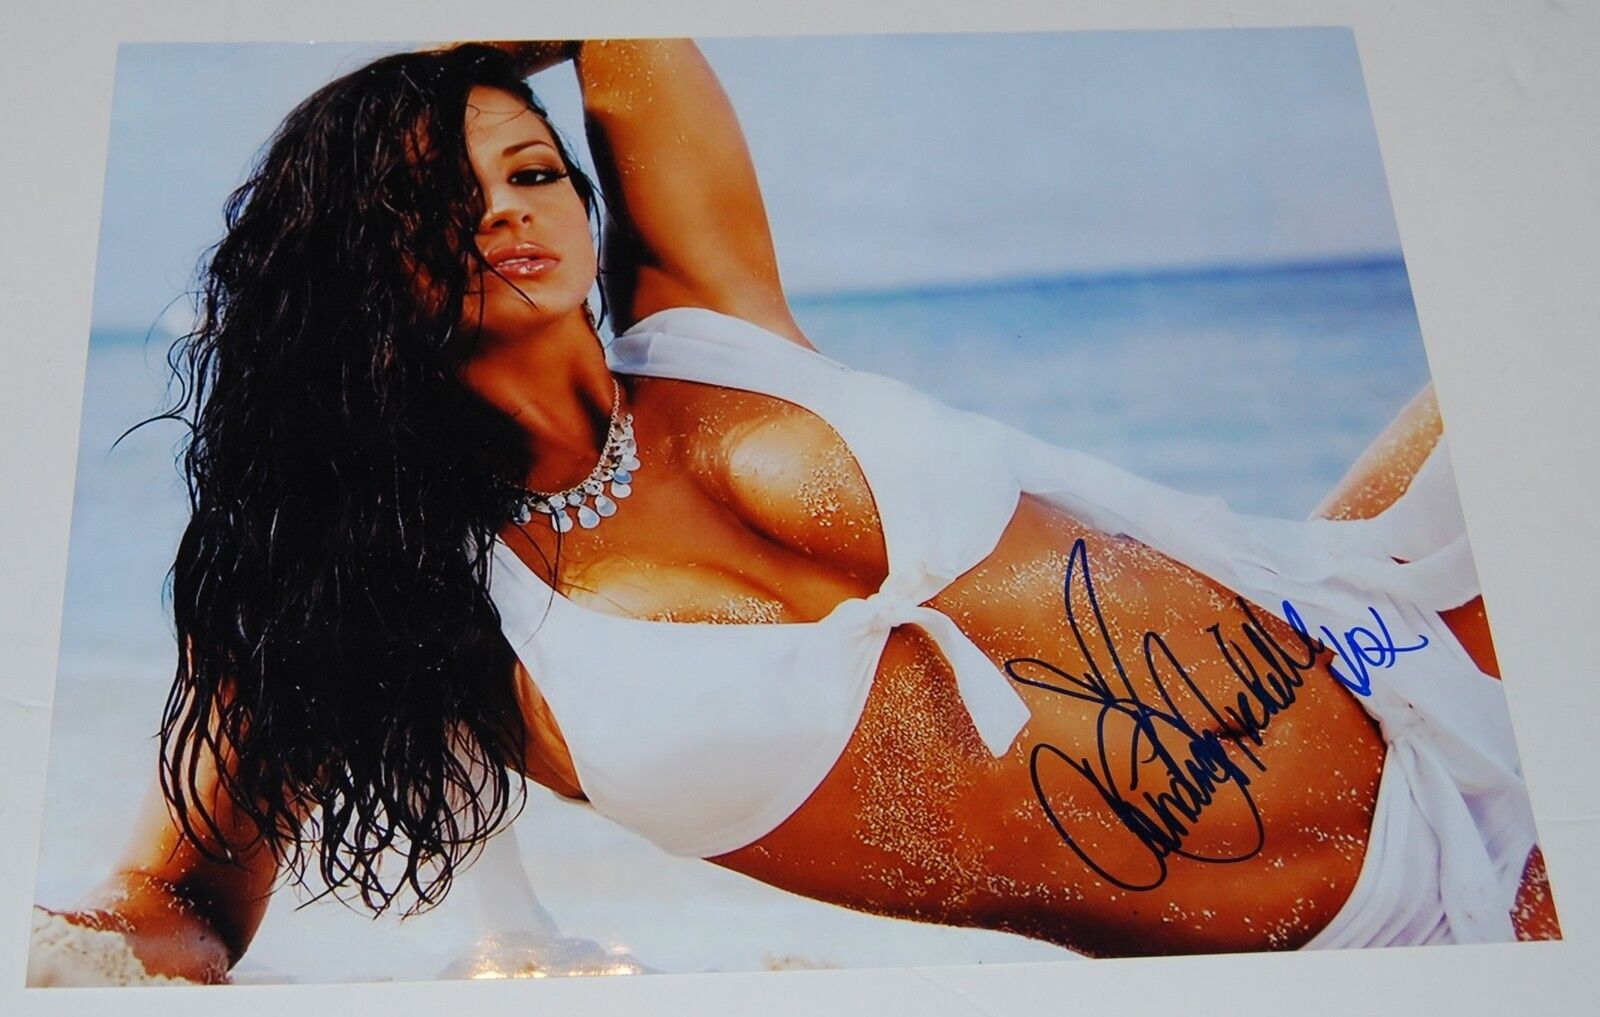 CANDICE MICHELLE signed (WRESTLING) WWE DIVA16X20 Photo Poster painting autographed W/COA